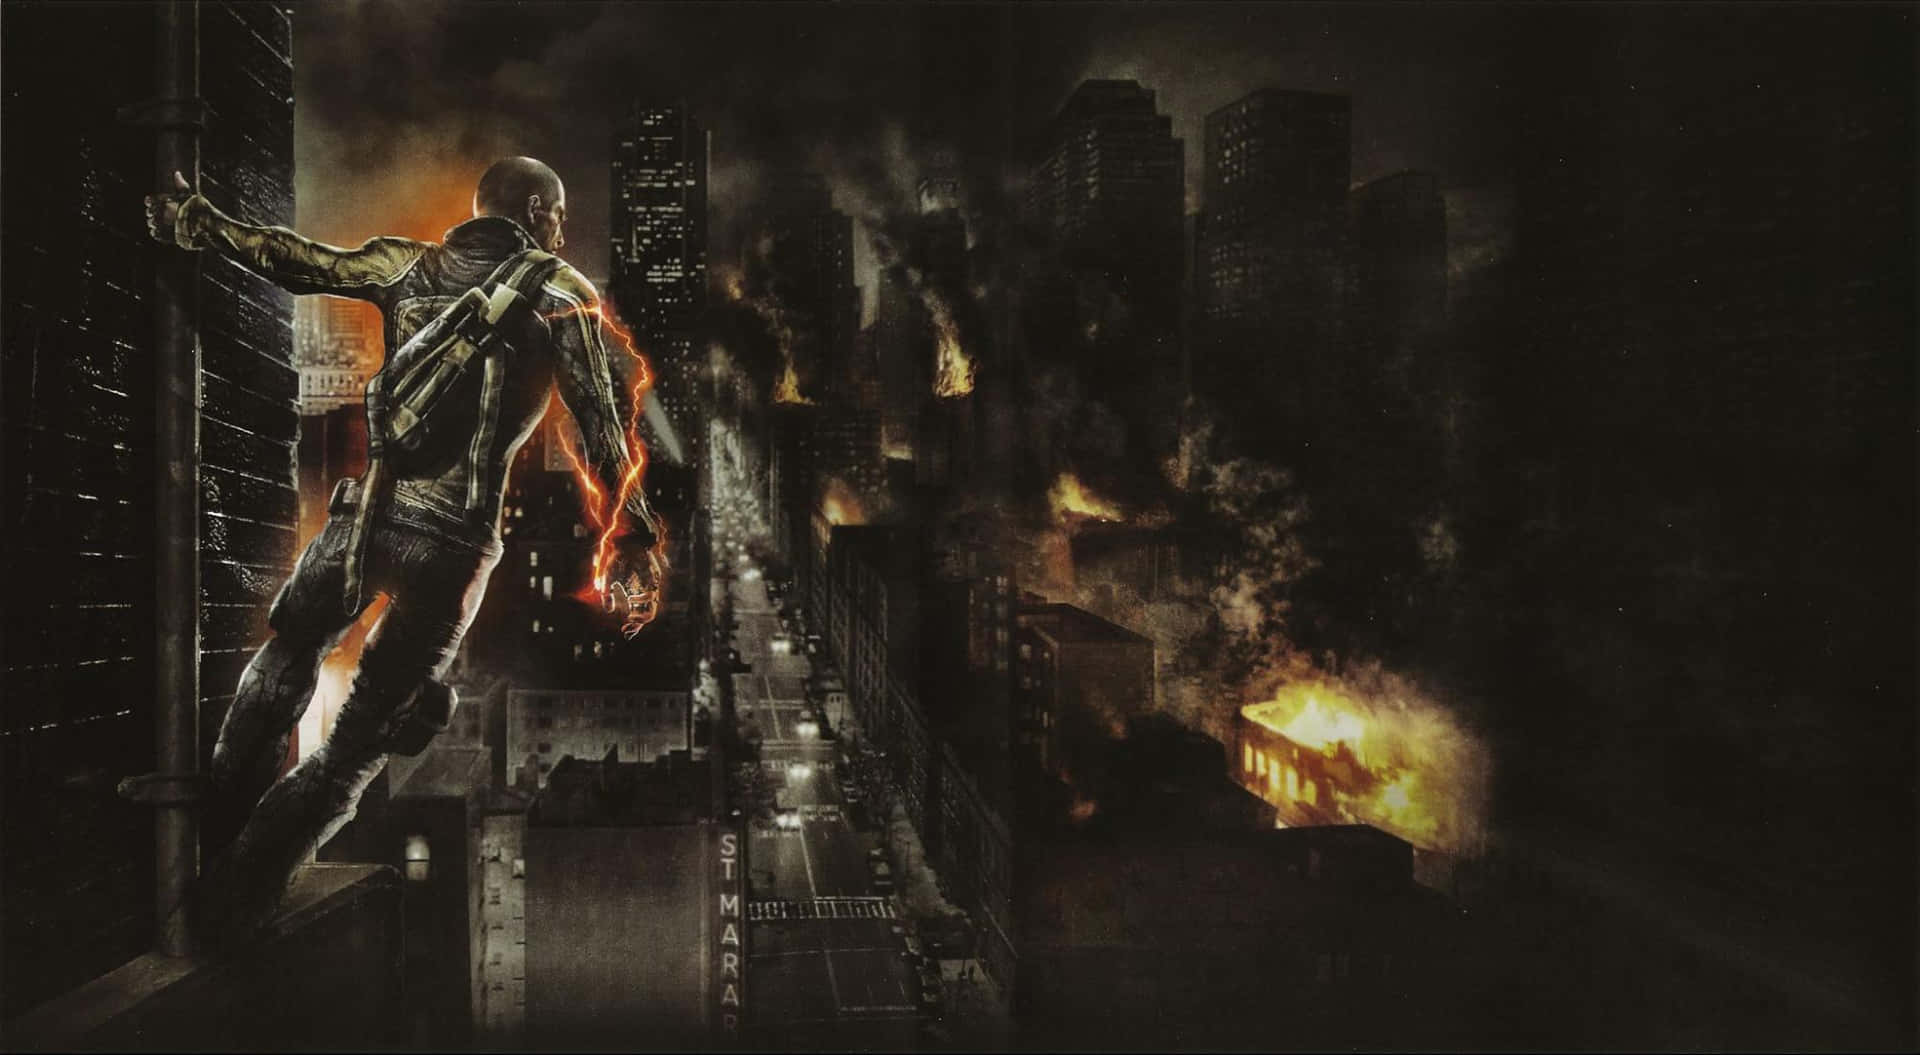 Infamous Hero Stance In A Grim City Wallpaper